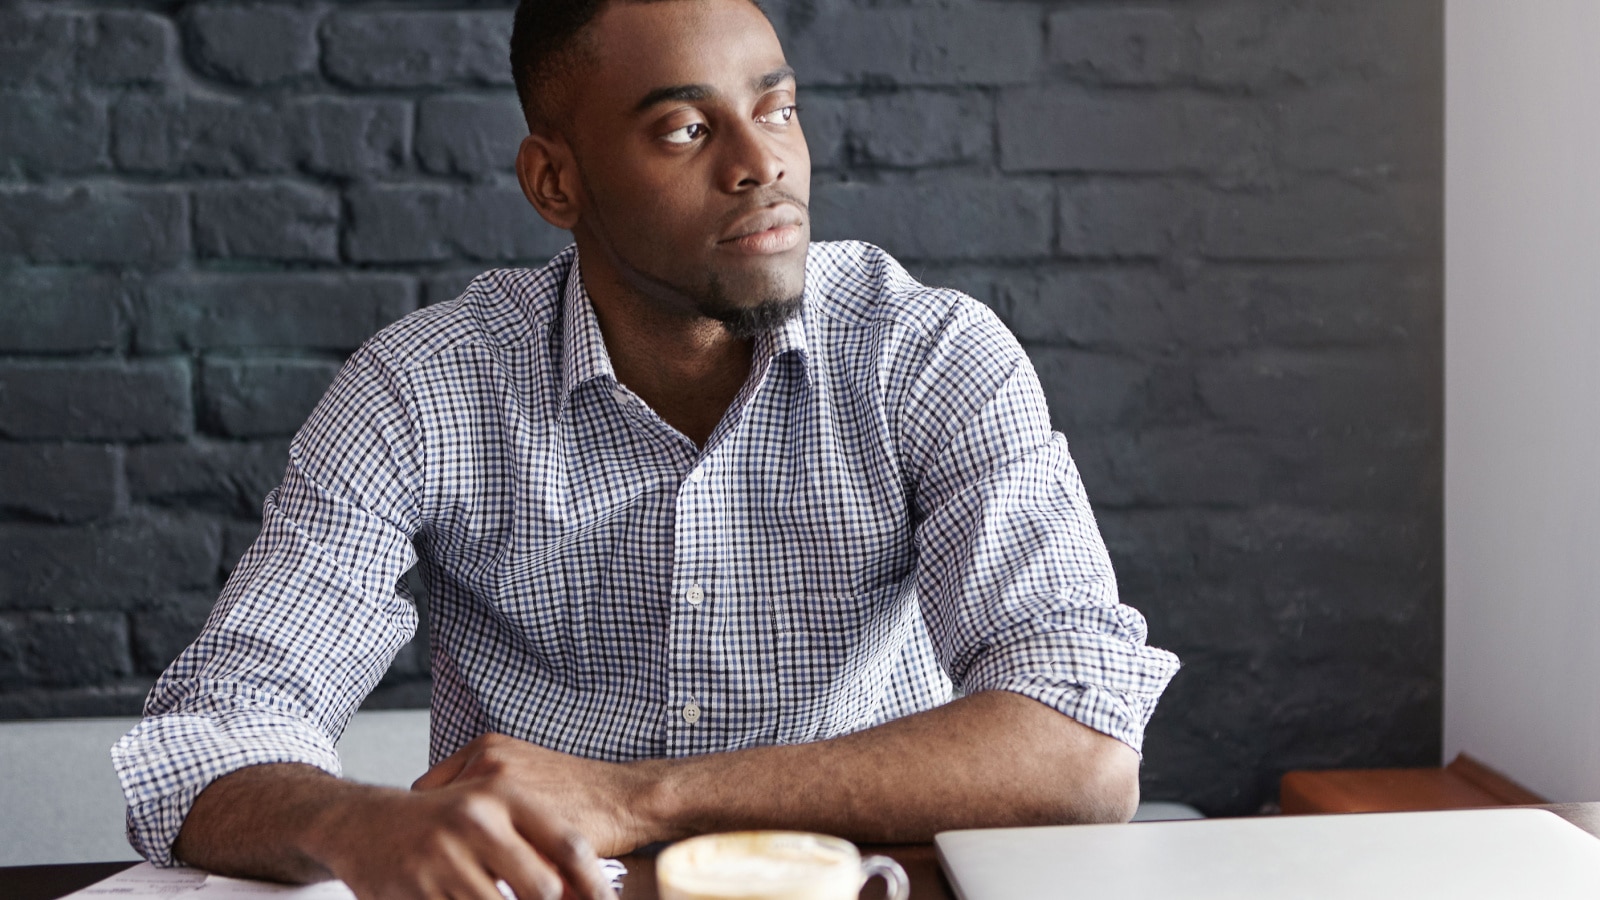 African-Ameican entrepreneur wearing shirt with rolled up sleeves looking through window with thoughtful and serious face expression, feeling nervous before meeting with business partners at cafe